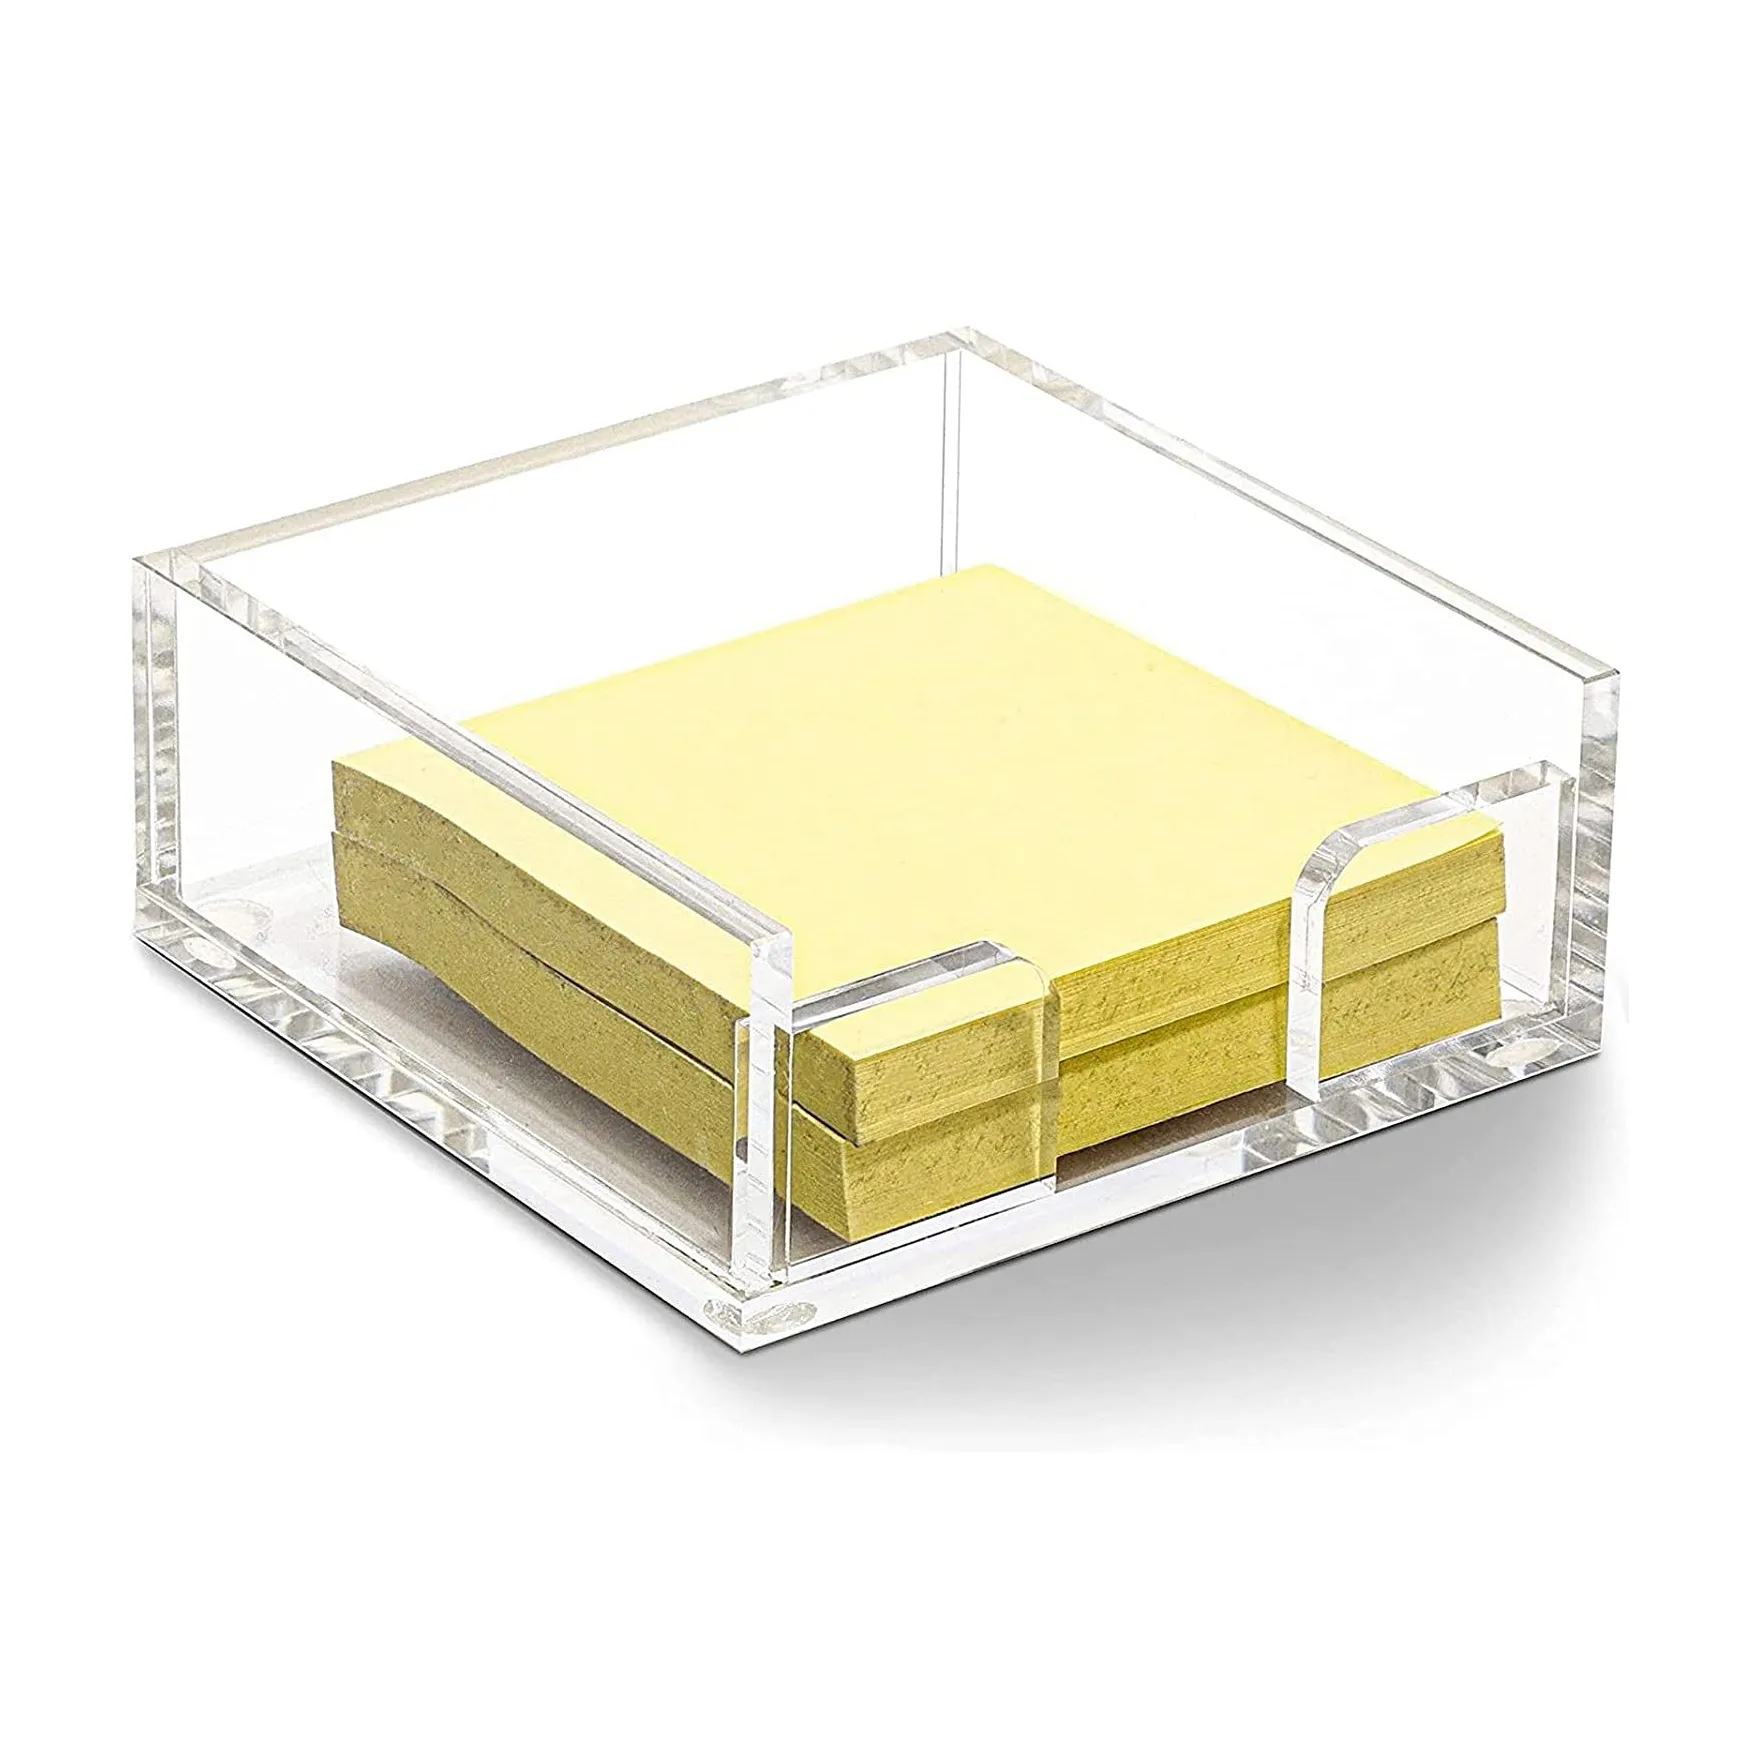 Square Clear Acrylic Memo Notepads Sticky Tray Holder for Home, School, Office Desk Organization